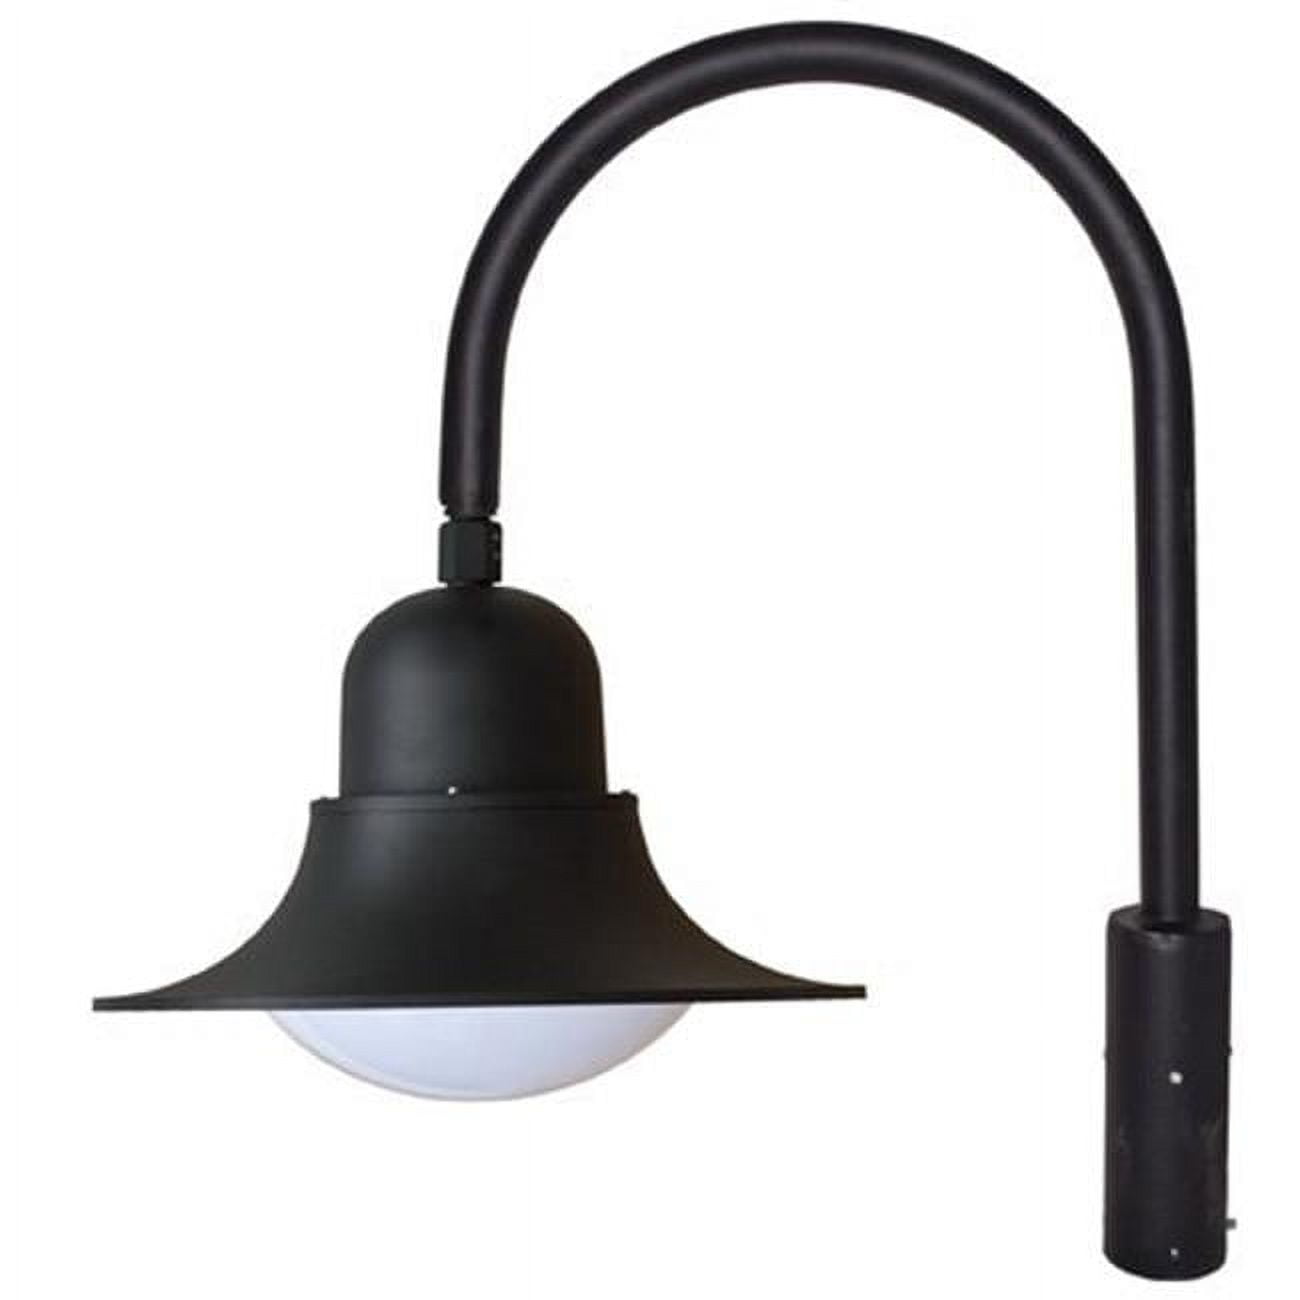 Picture of Dabmar Lighting GM617-B-MT 70W Powder Coated Cast Aluminum Post Top Light Fixture with Metal Halide Lamp, Black - 35.50 x 22 x 30.92 in.